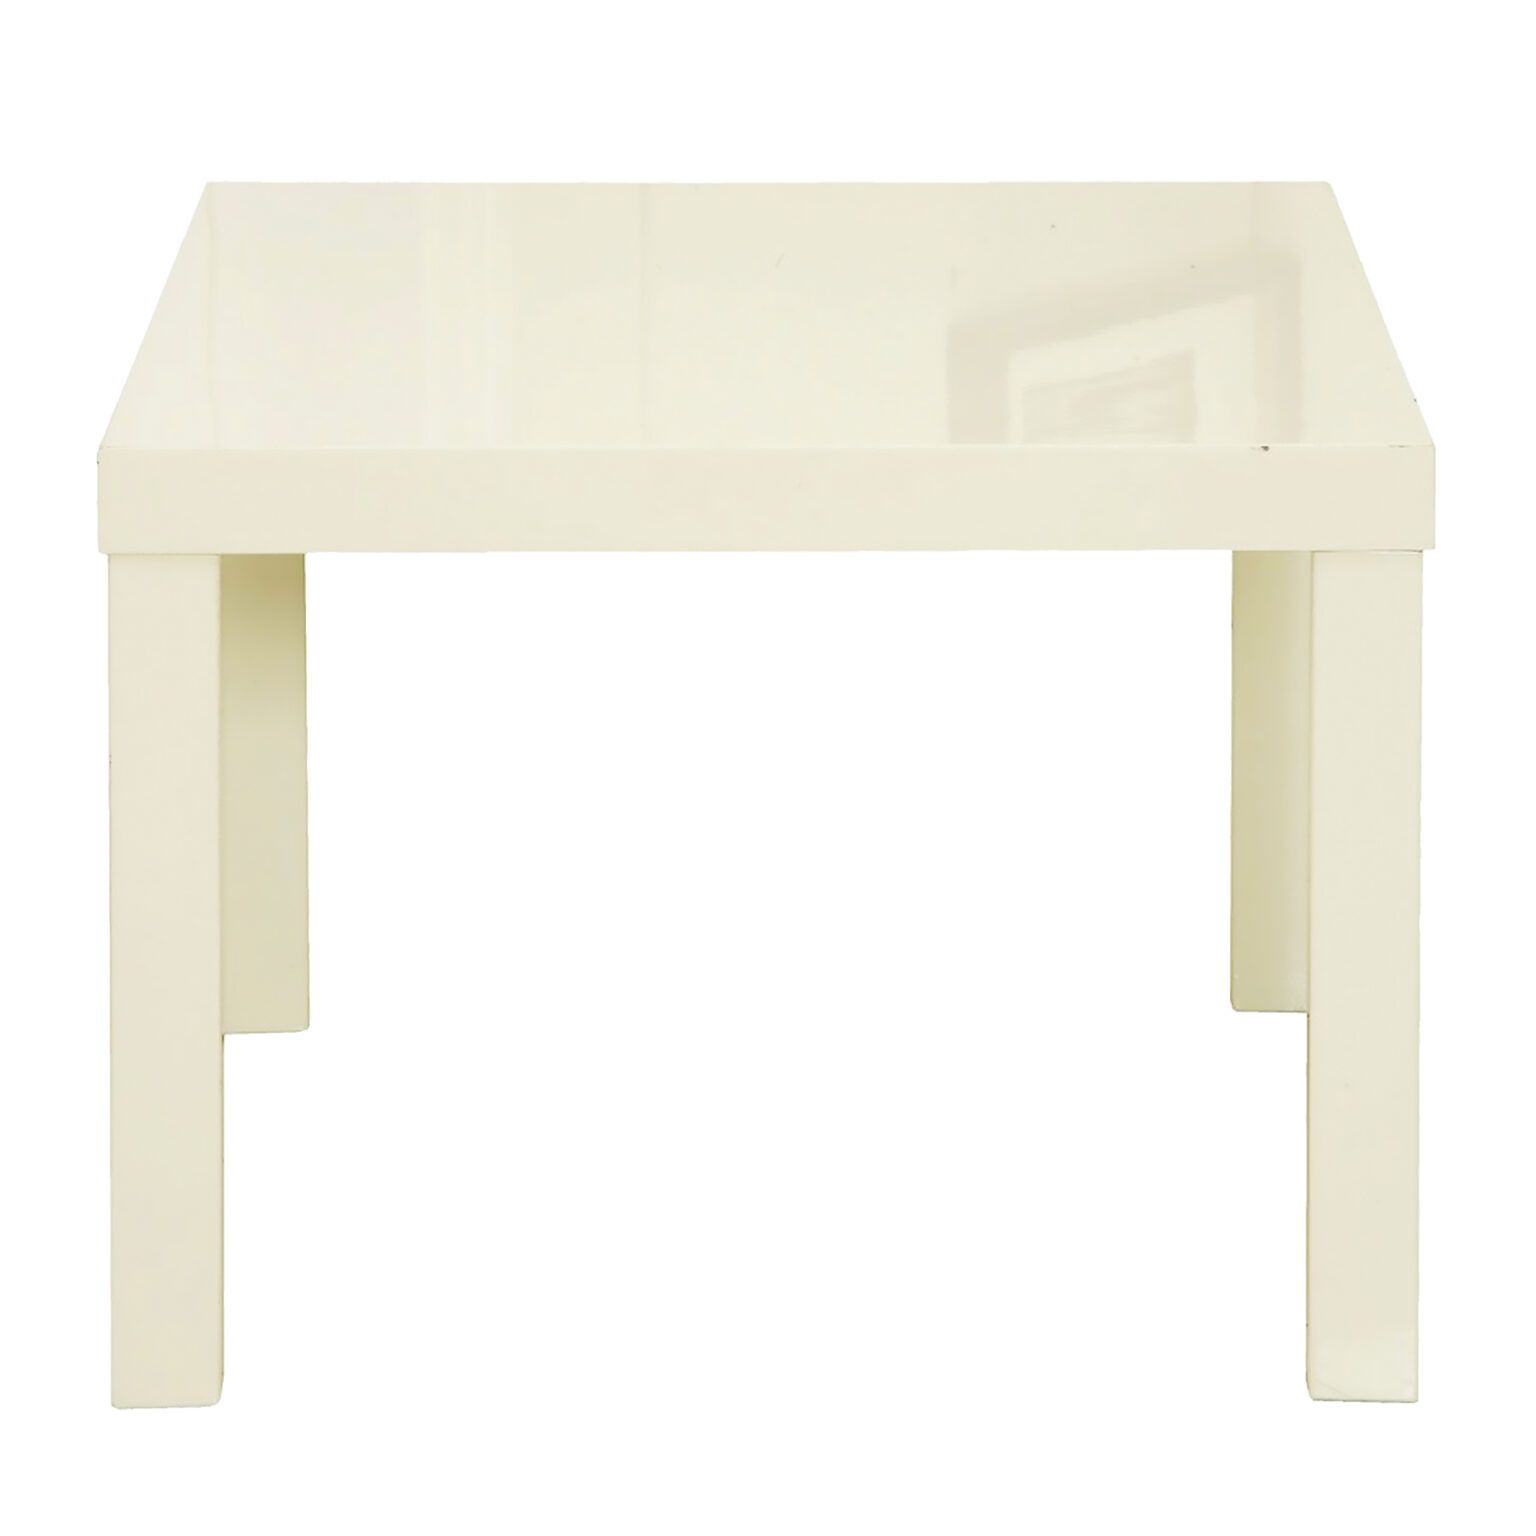 Lpd Puro Console Table White | Modern Furniture Shop In Puro White Tv Stands (View 3 of 15)